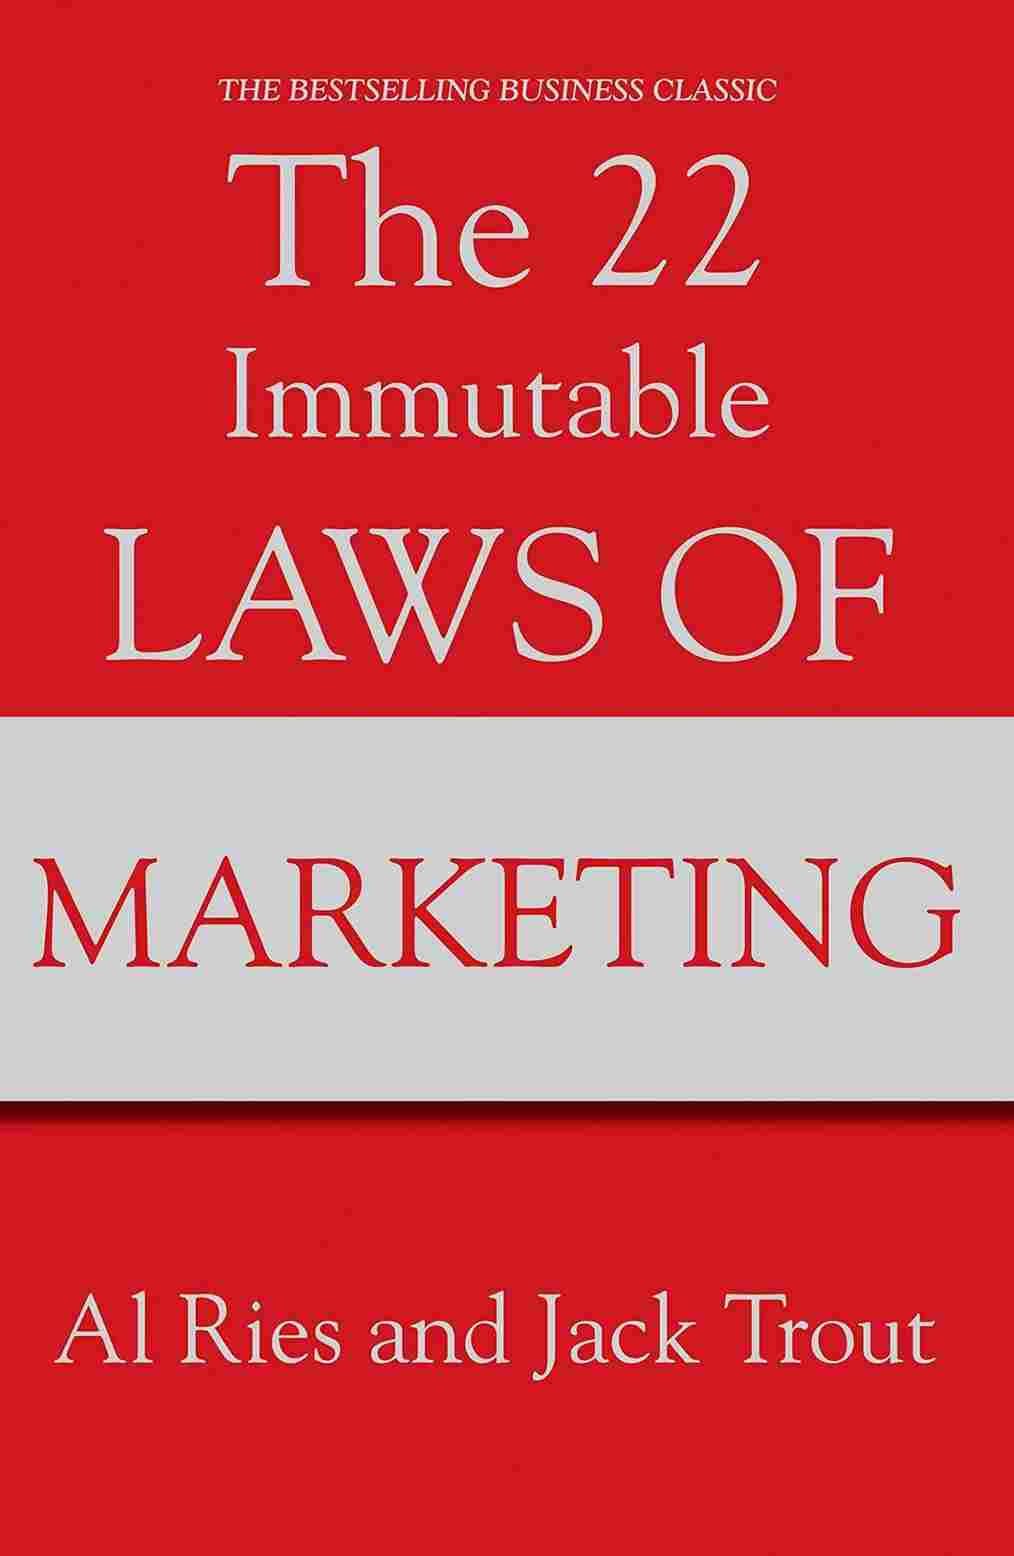 The 22 Immutable Laws Of Marketing (Paperback) - Al Ries